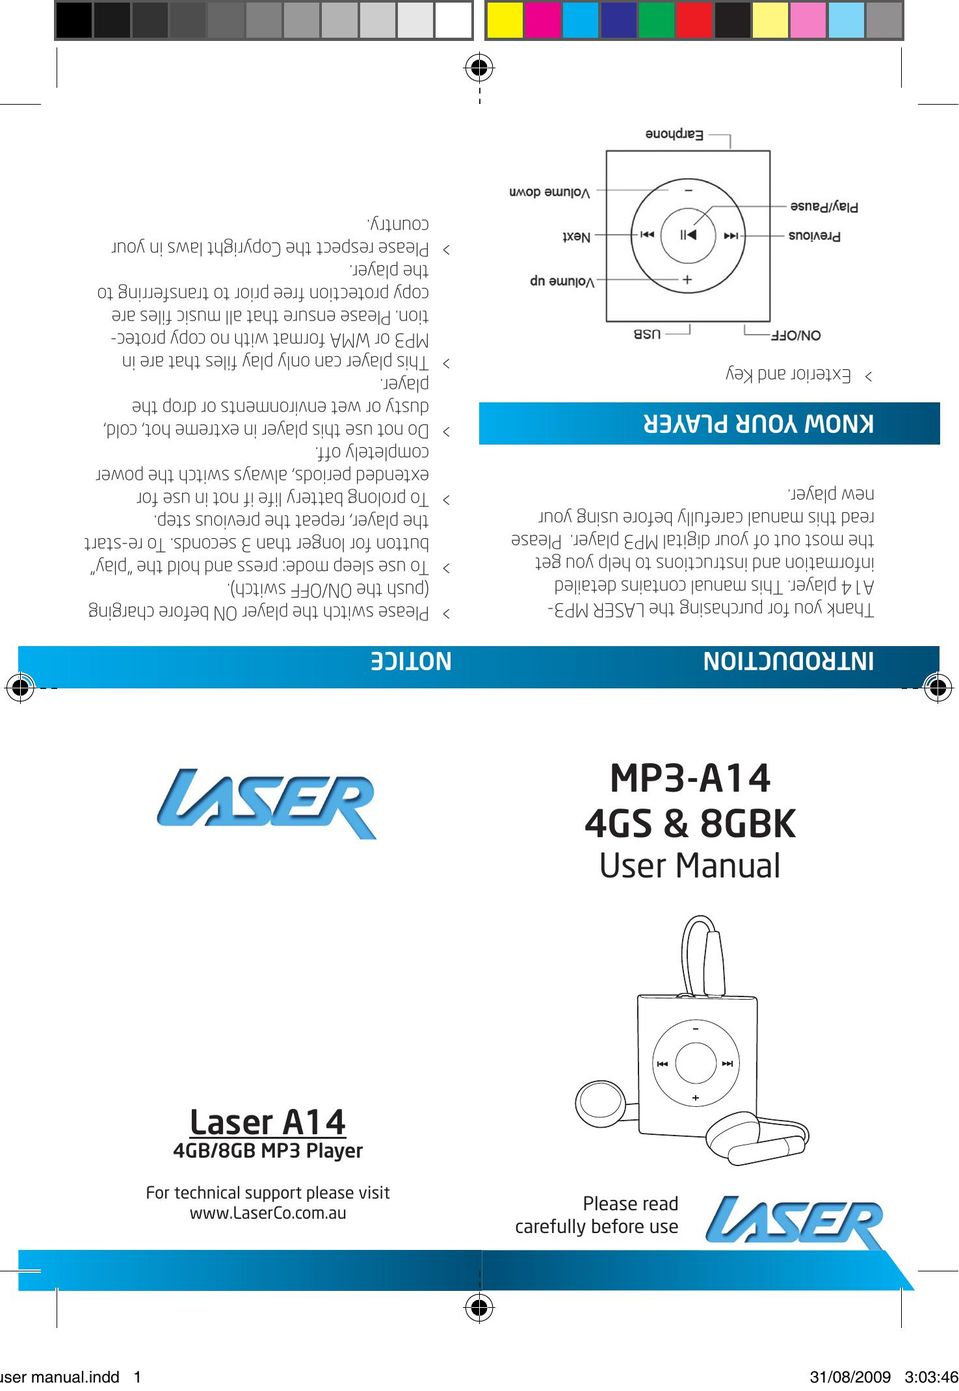 Laser MP3-A14 MP3 Player User Manual